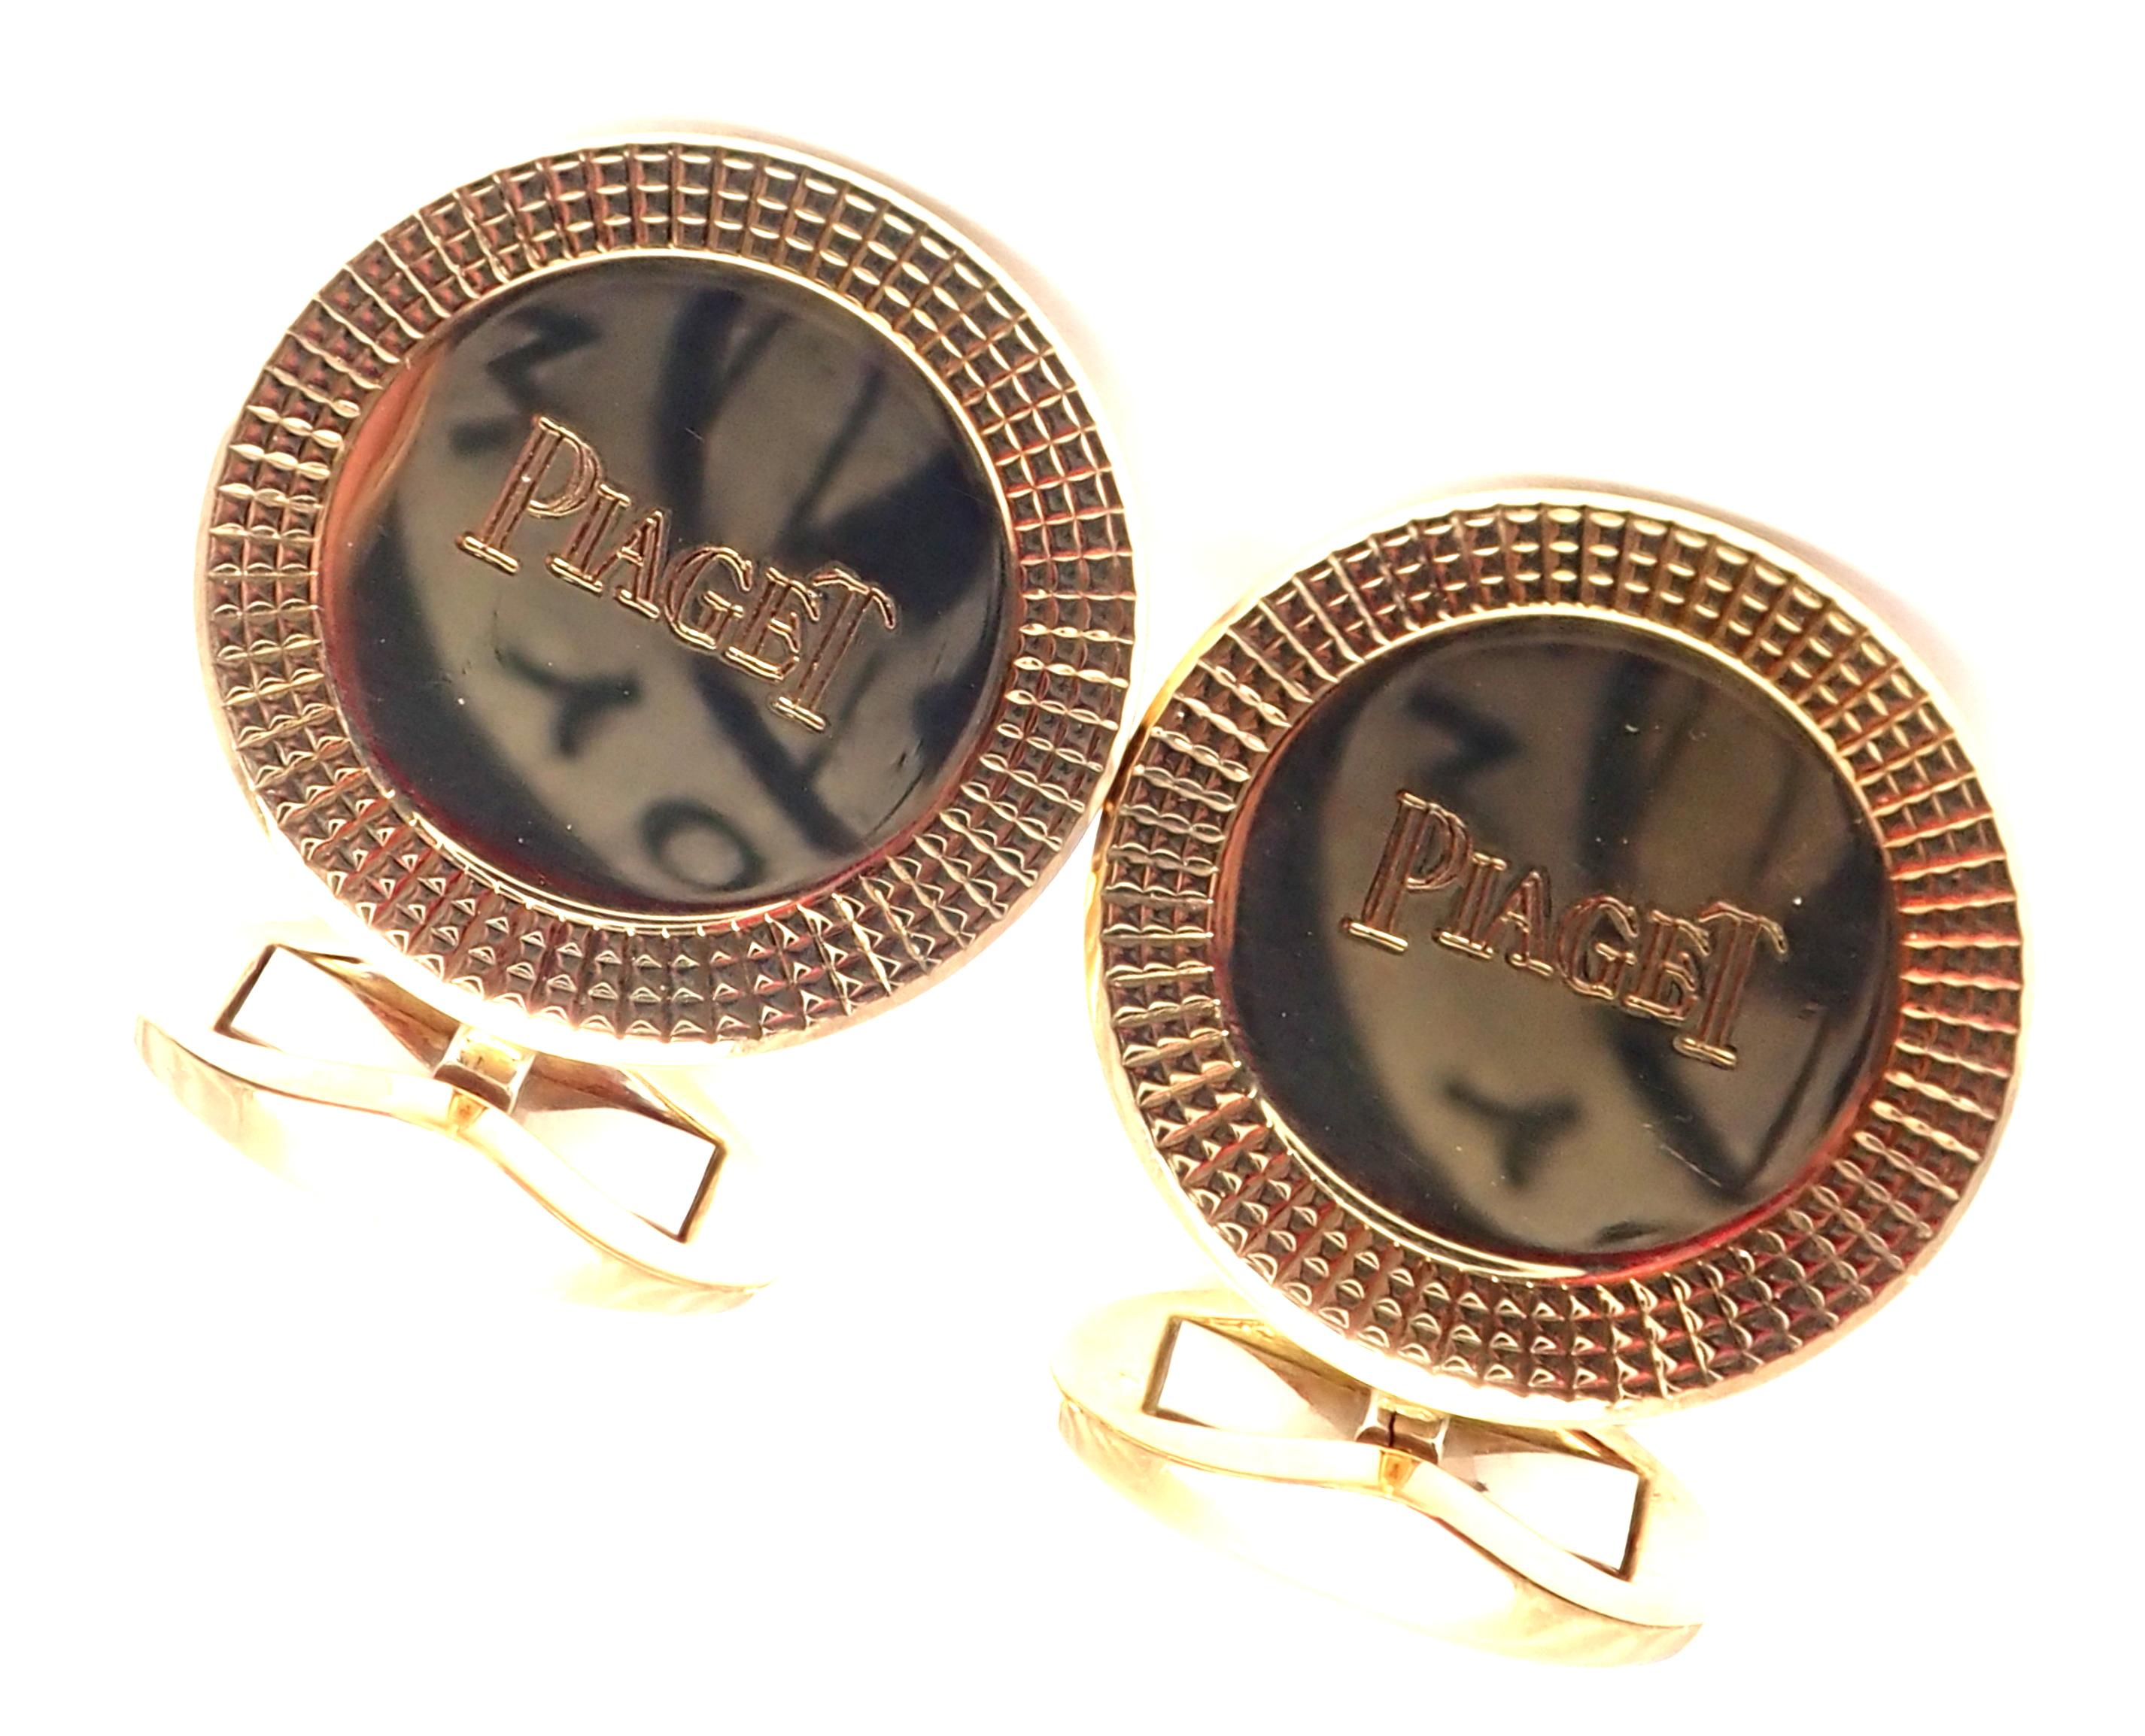 Piaget Yellow Gold Cufflinks In Excellent Condition For Sale In Holland, PA